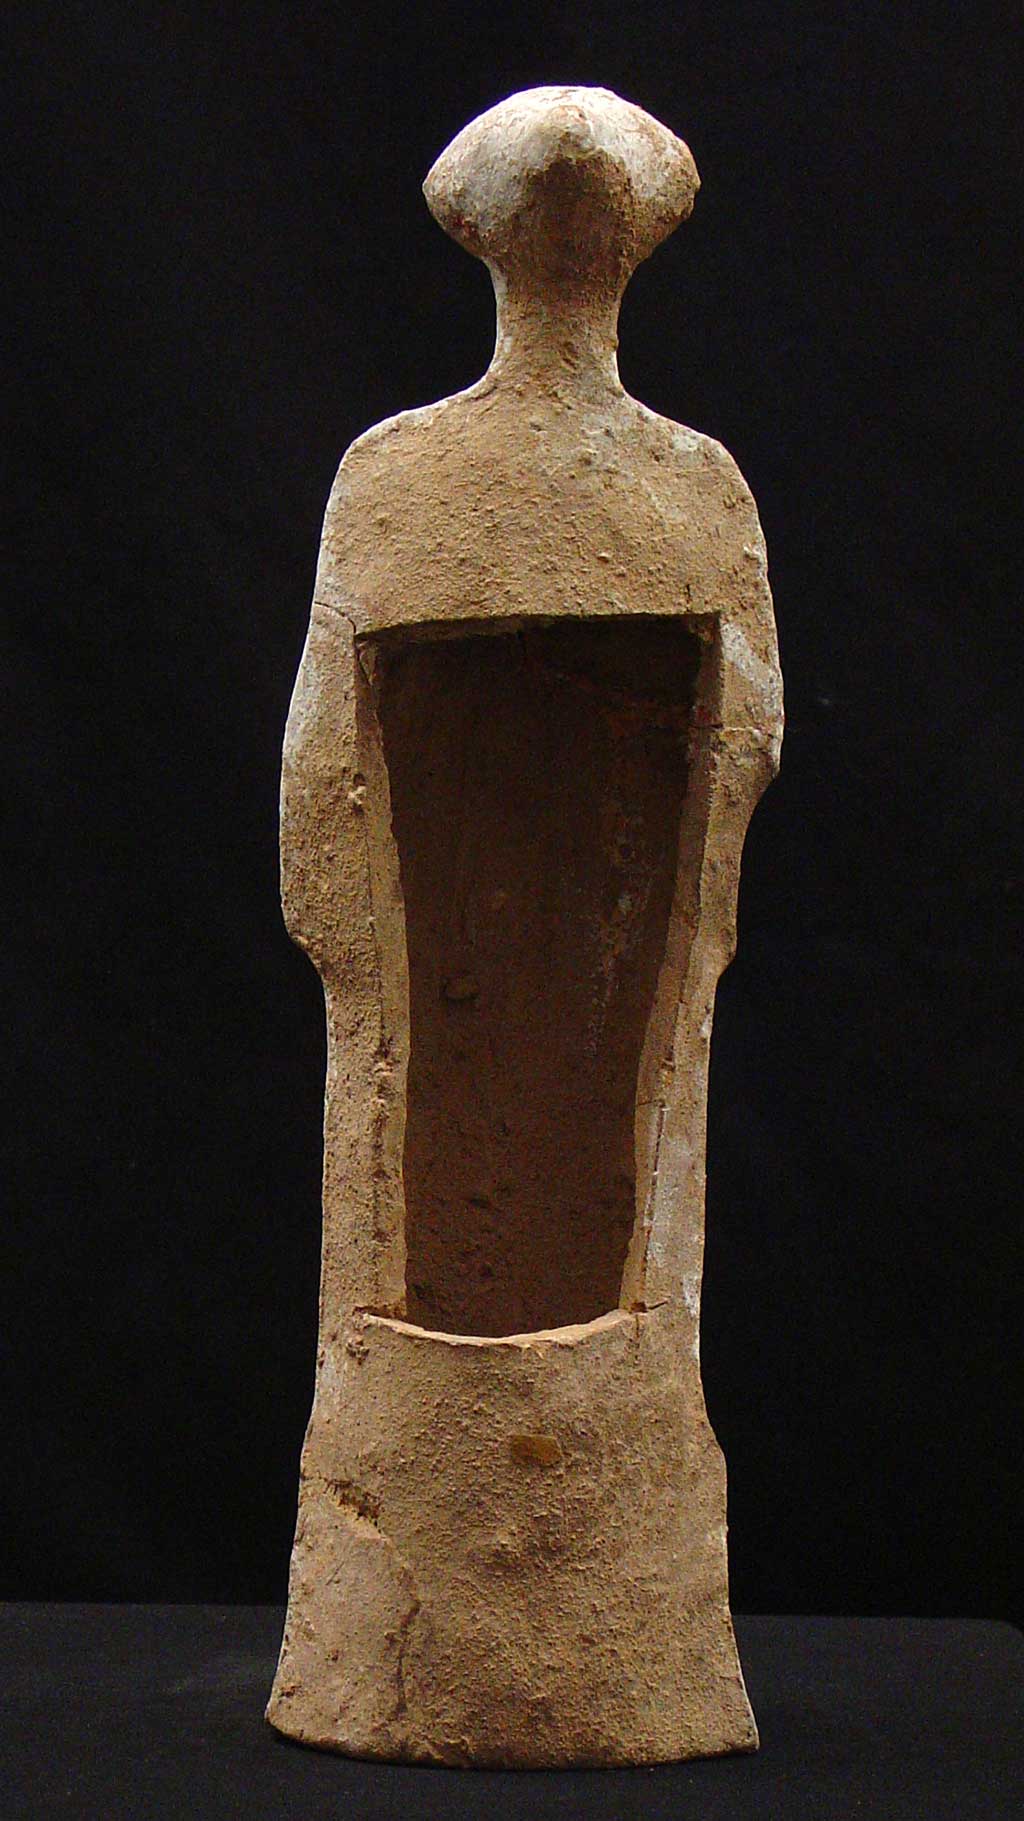 full back view of standing figure with a hole in the back